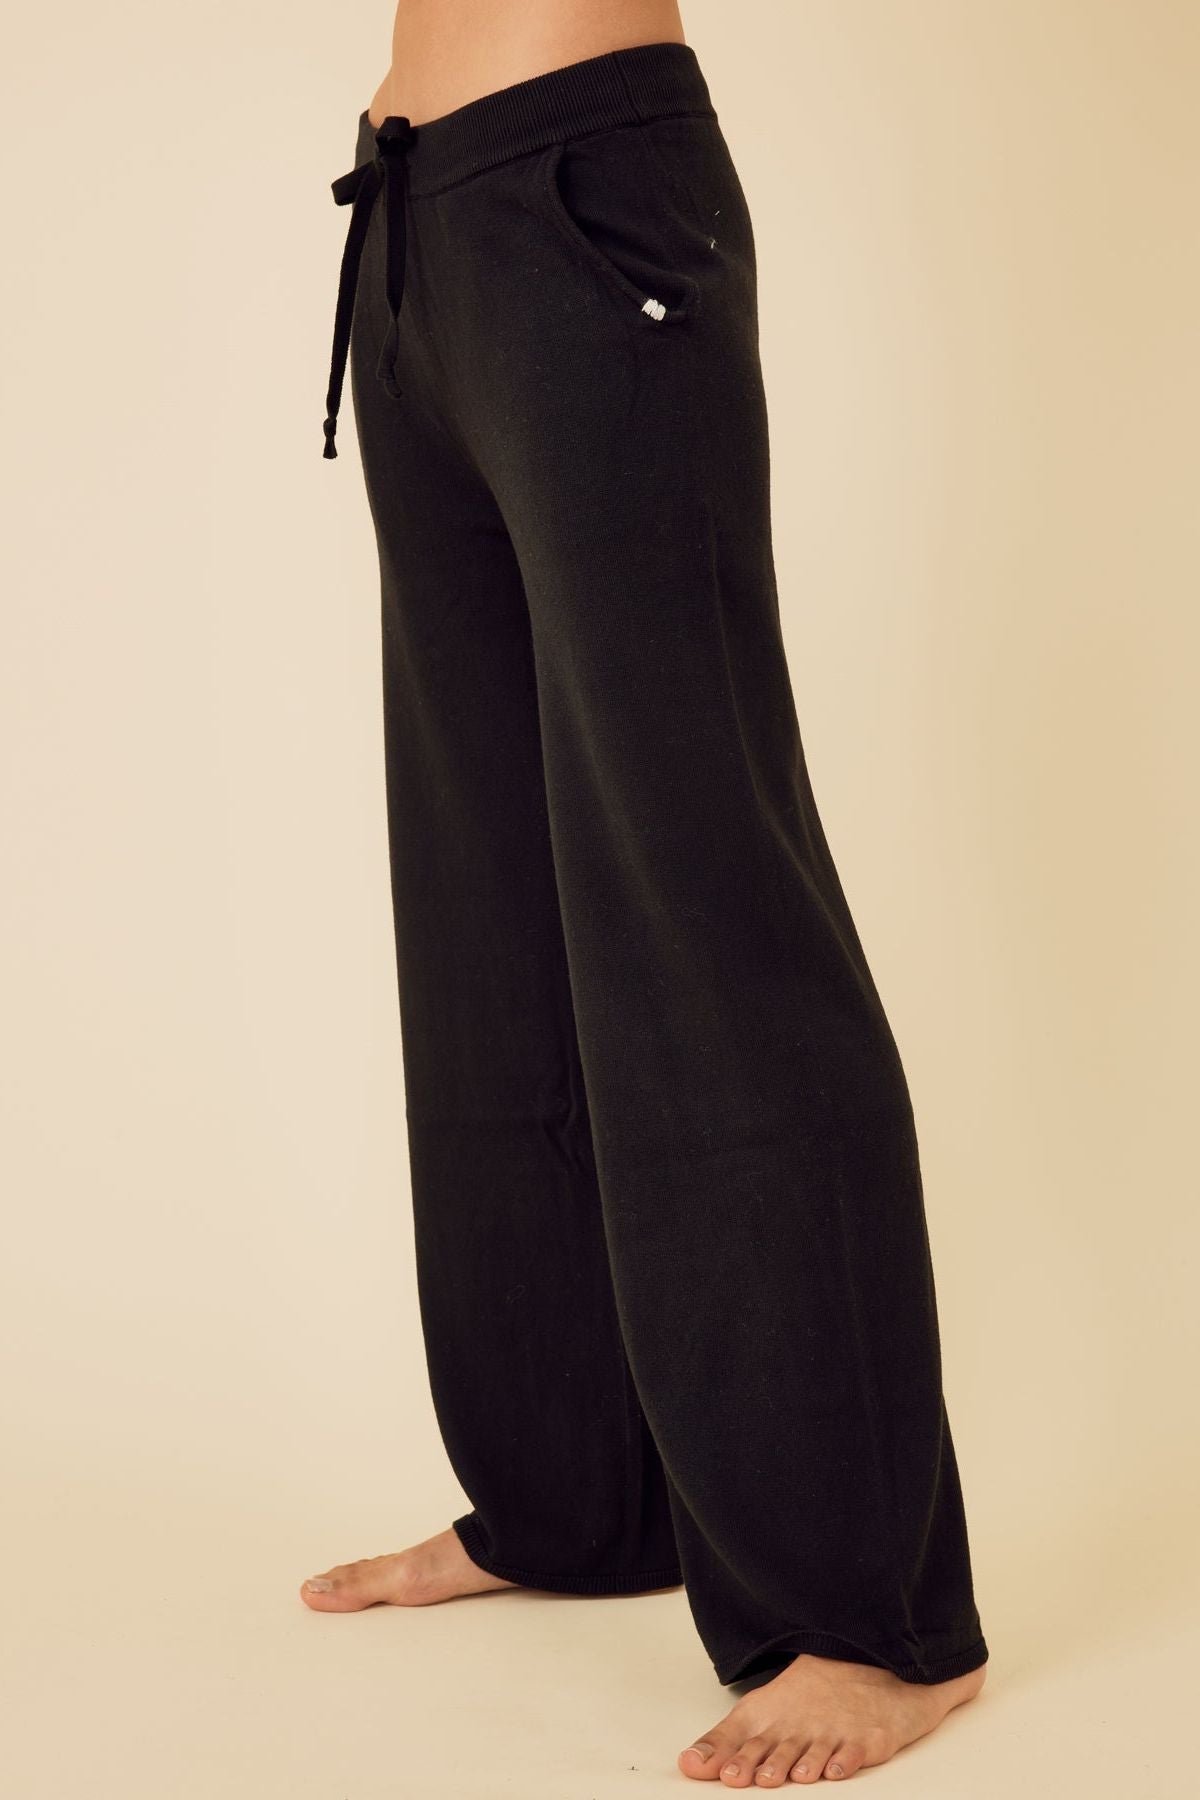 One Grey Day - Bianca Cropped Pant in Black